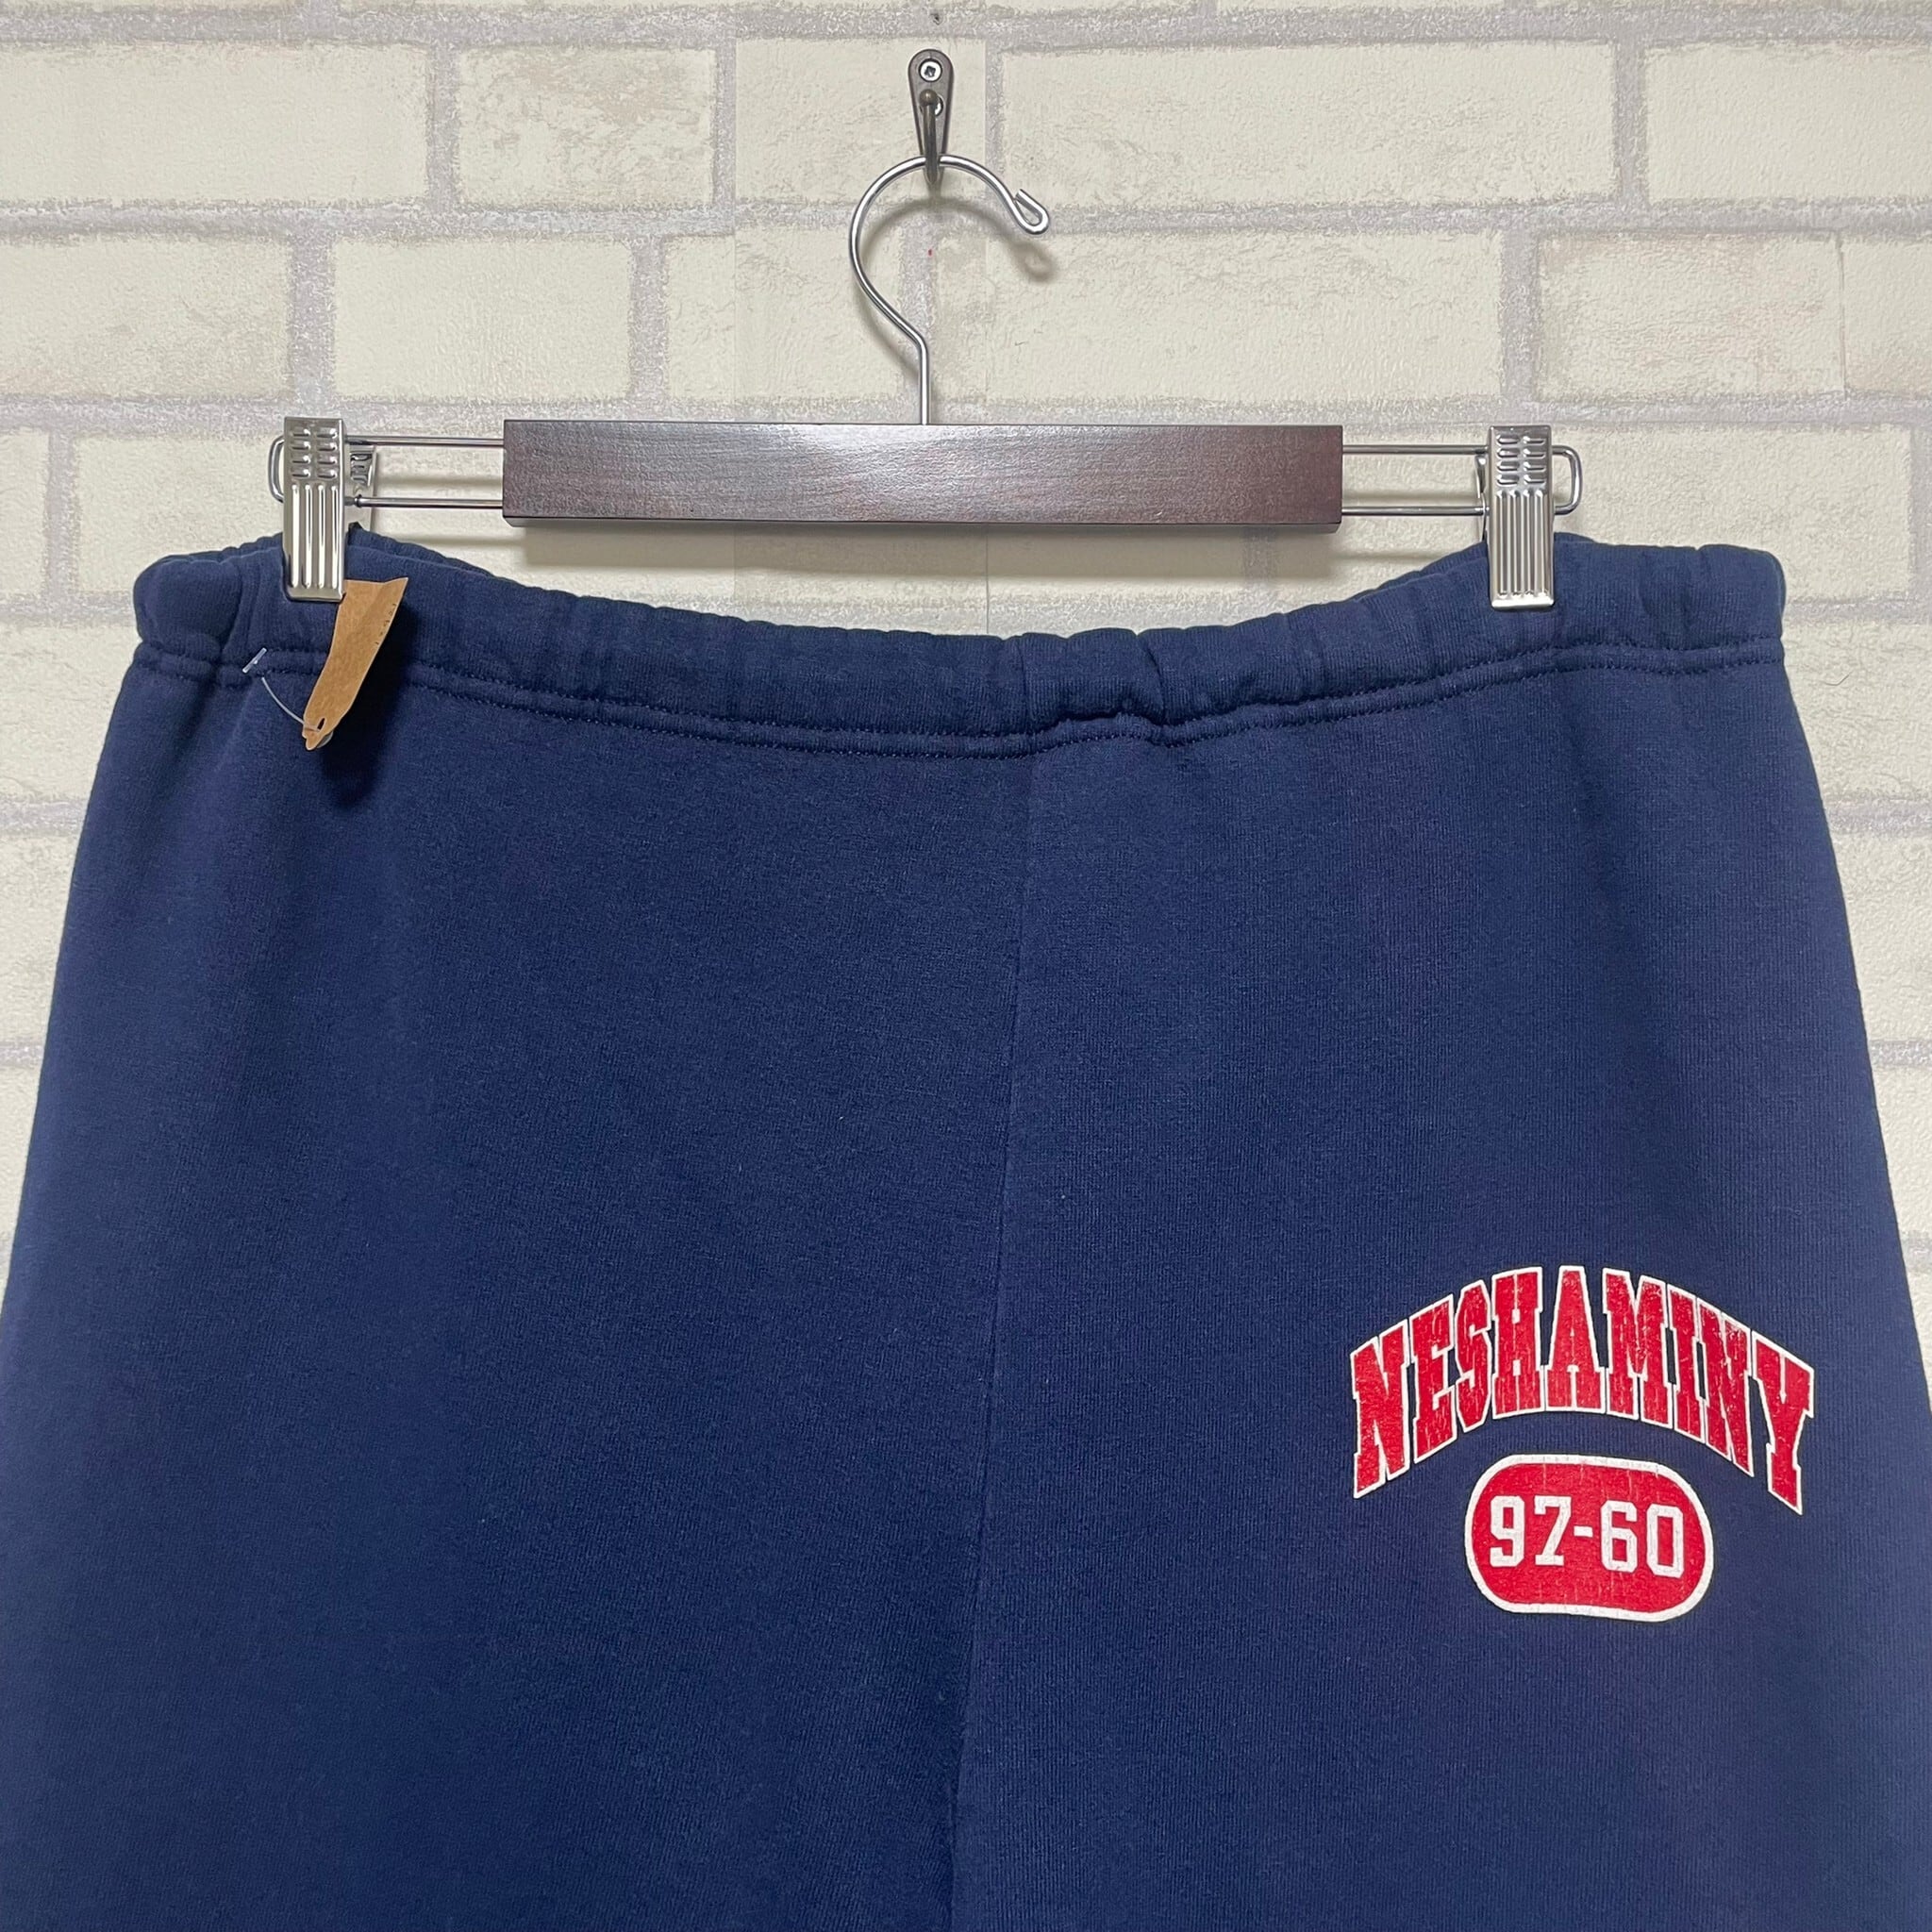 90's】【Made in USA】【W38×L32】RUSSELL ATHLETIC スウェットパンツ ...